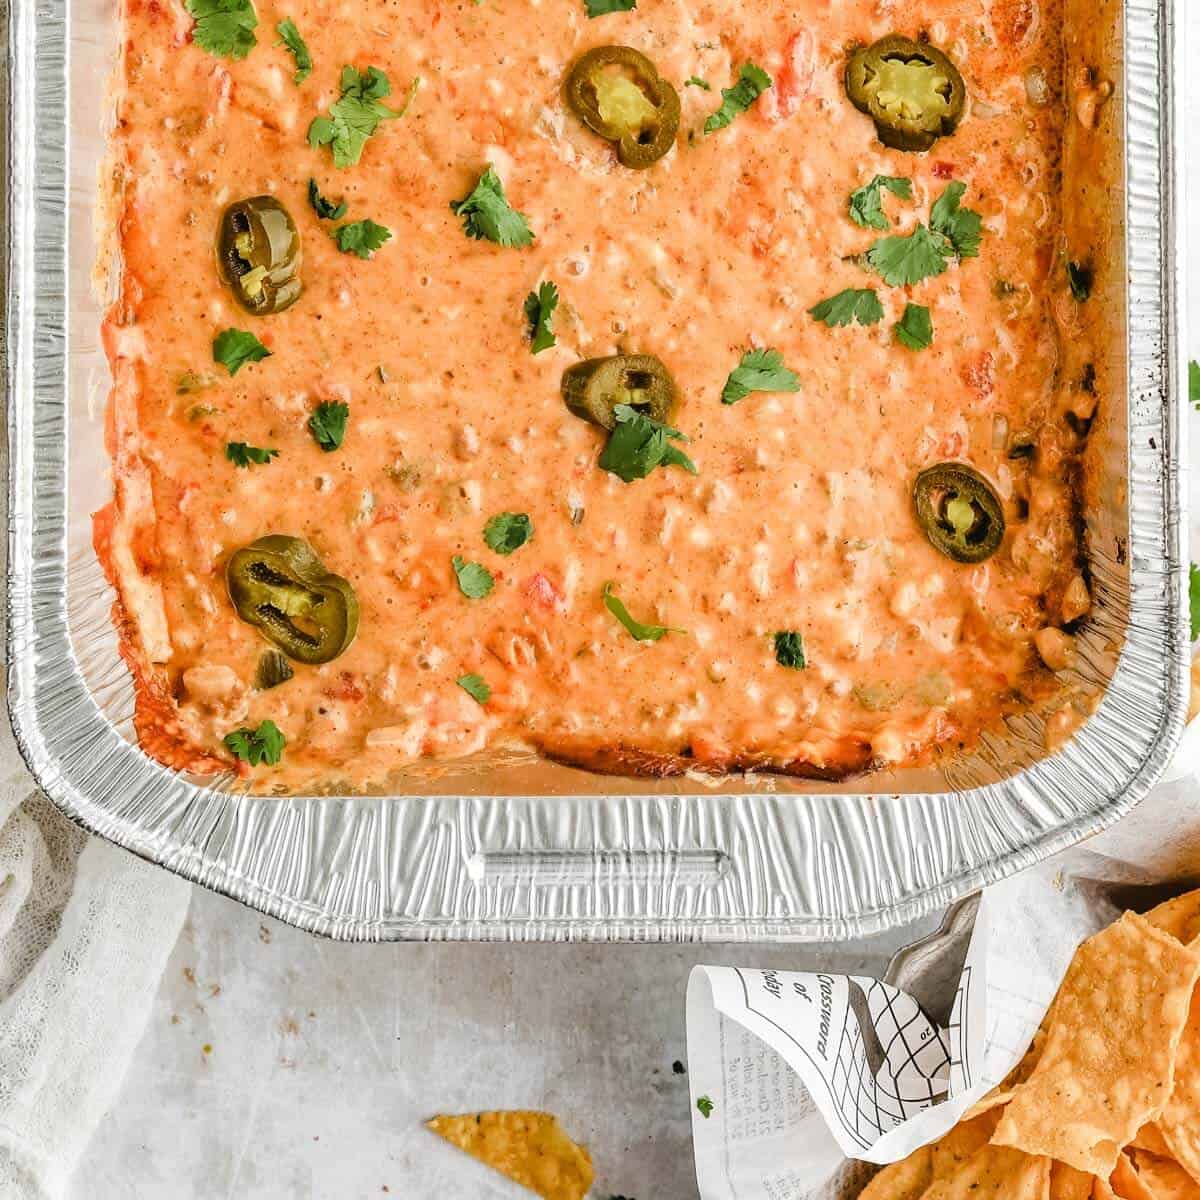 a photo of half a foil pan full of smoked queso dip topped with chopped cilantro and jalapeno slices next to a basket of tortilla chips